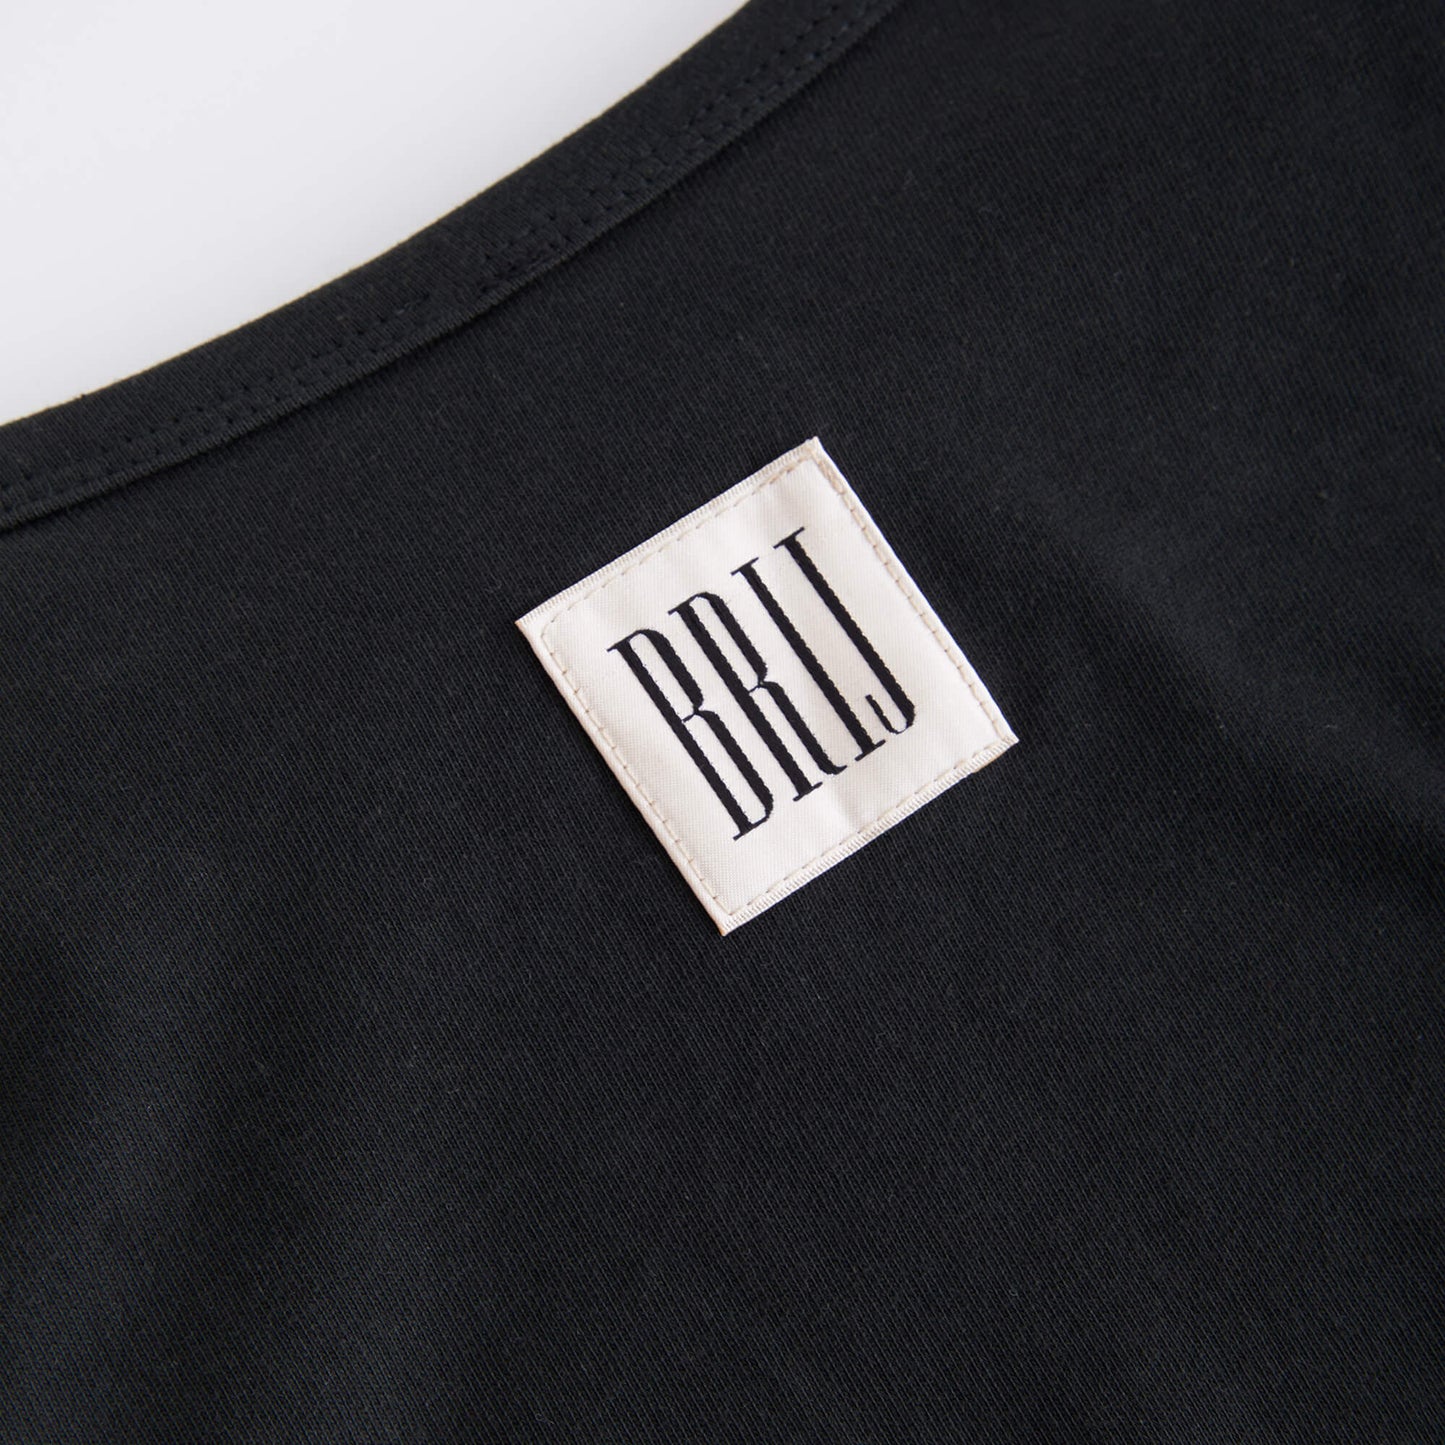 Product 0008 - The Foundation Tank (Black)